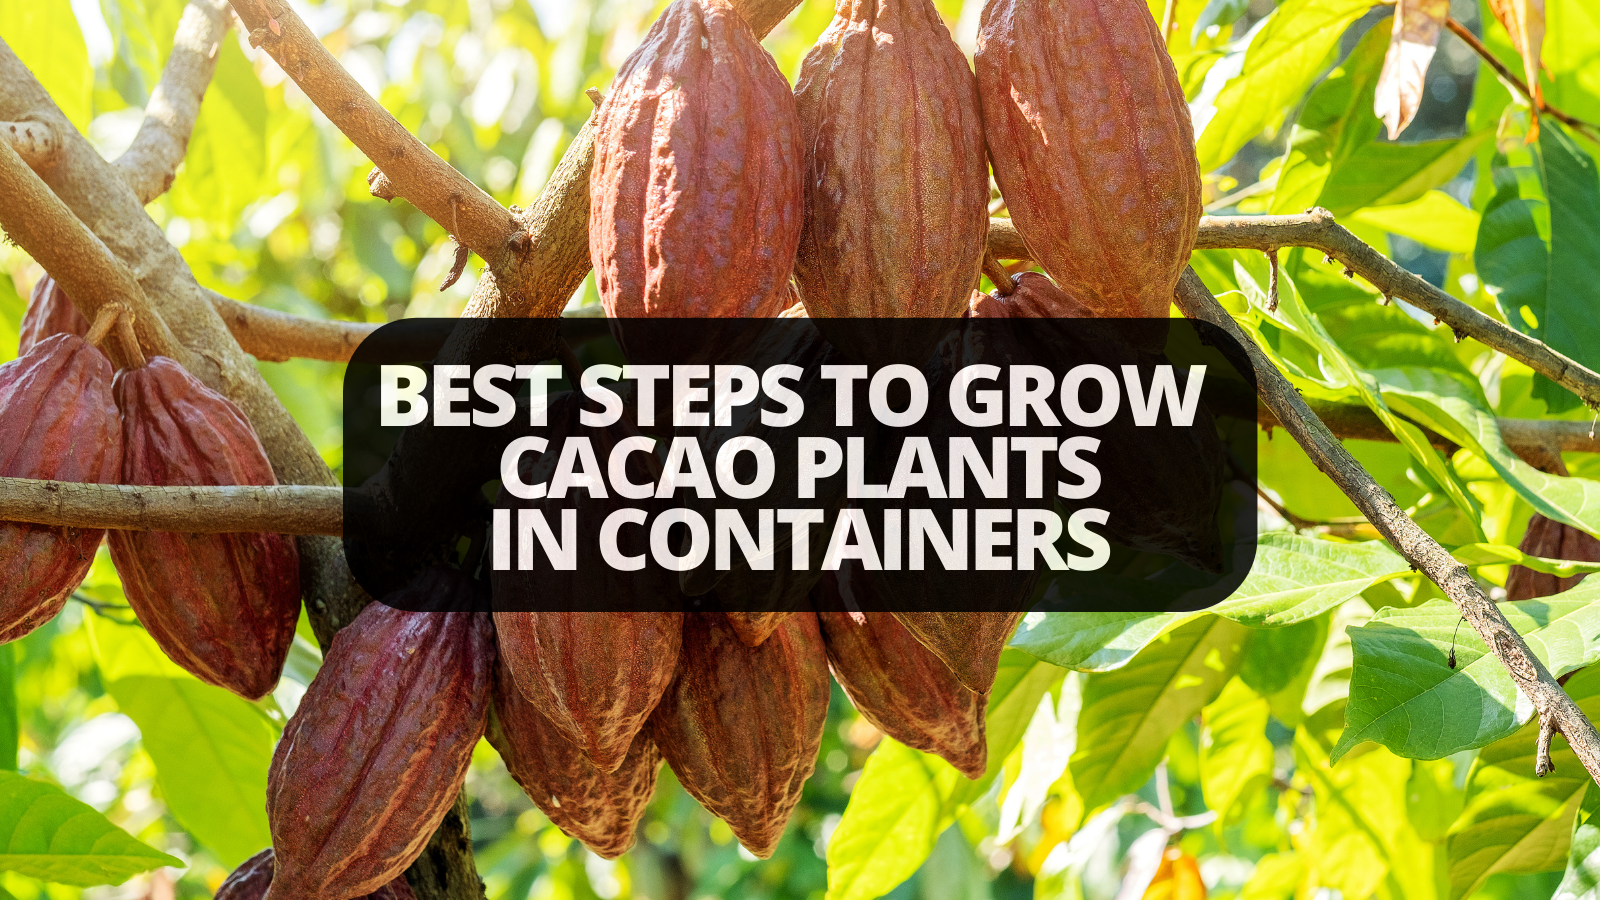 Best Steps To Grow Cacao Plants In Containers